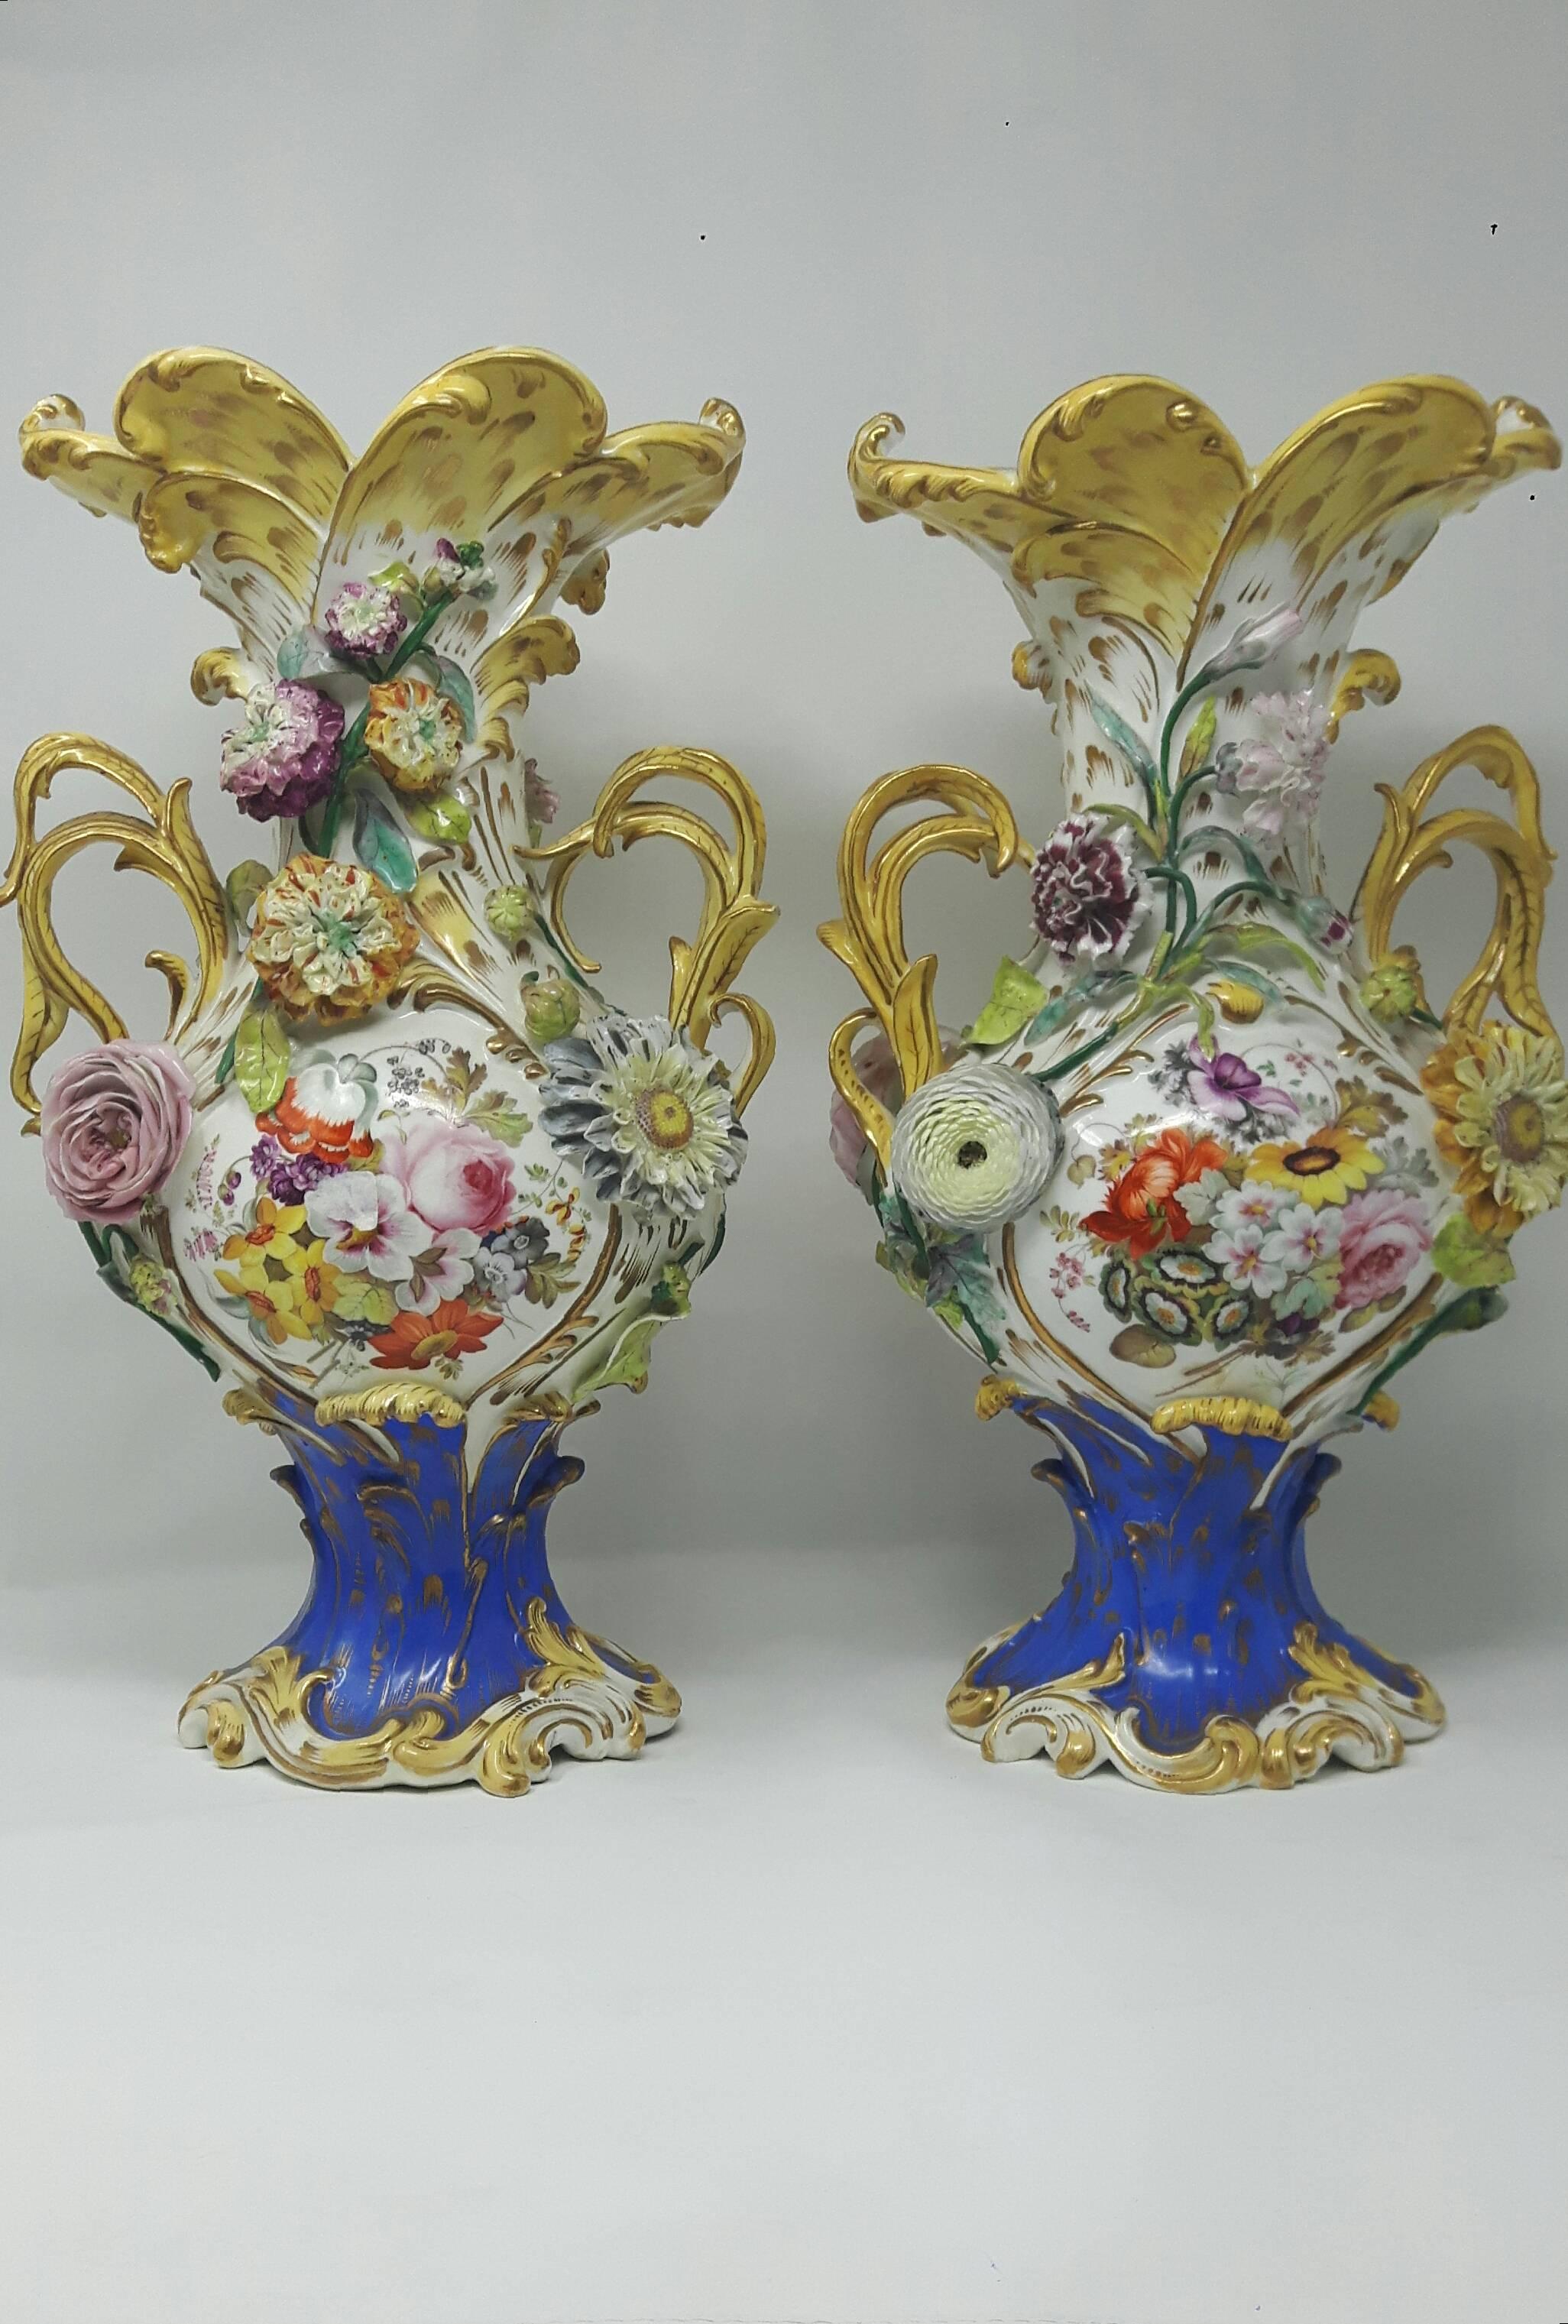 19th Century English Coalport Vases In Good Condition For Sale In London, GB